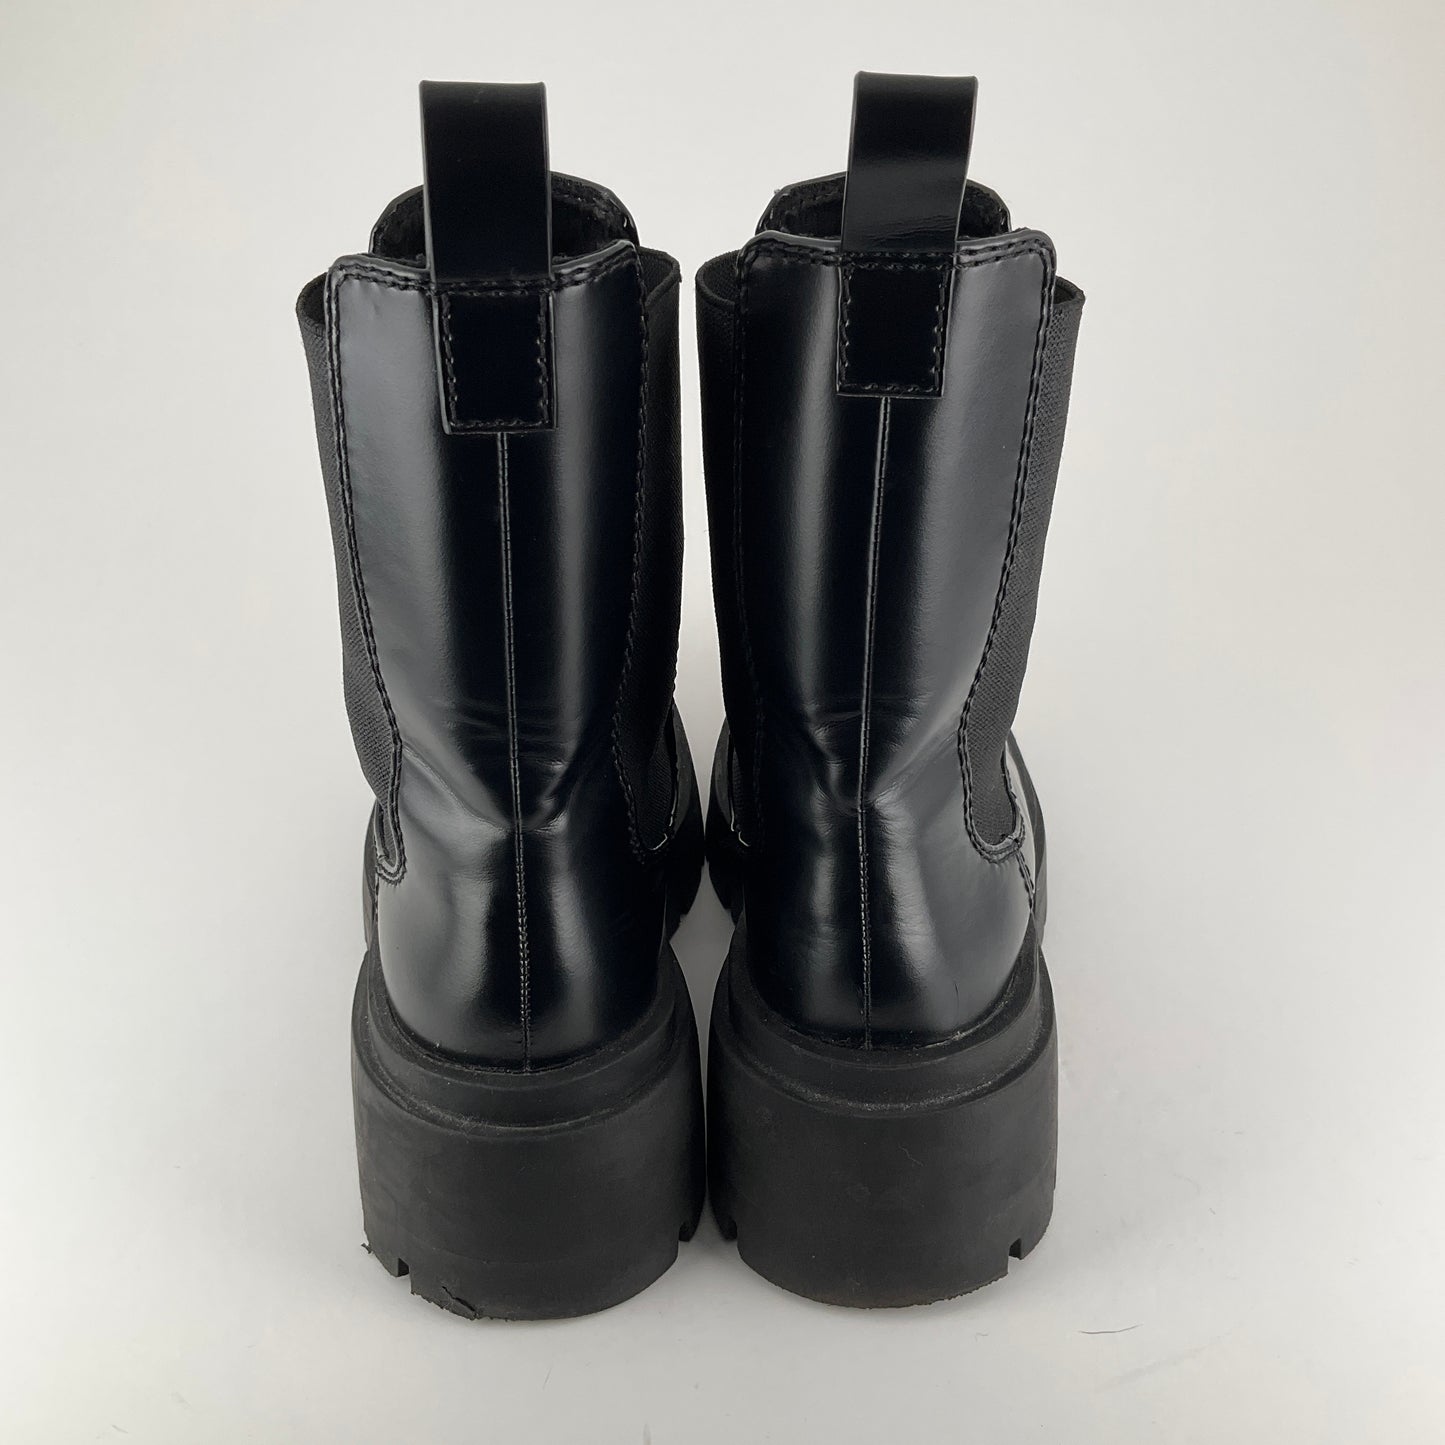 H&M - Boots - Size 38